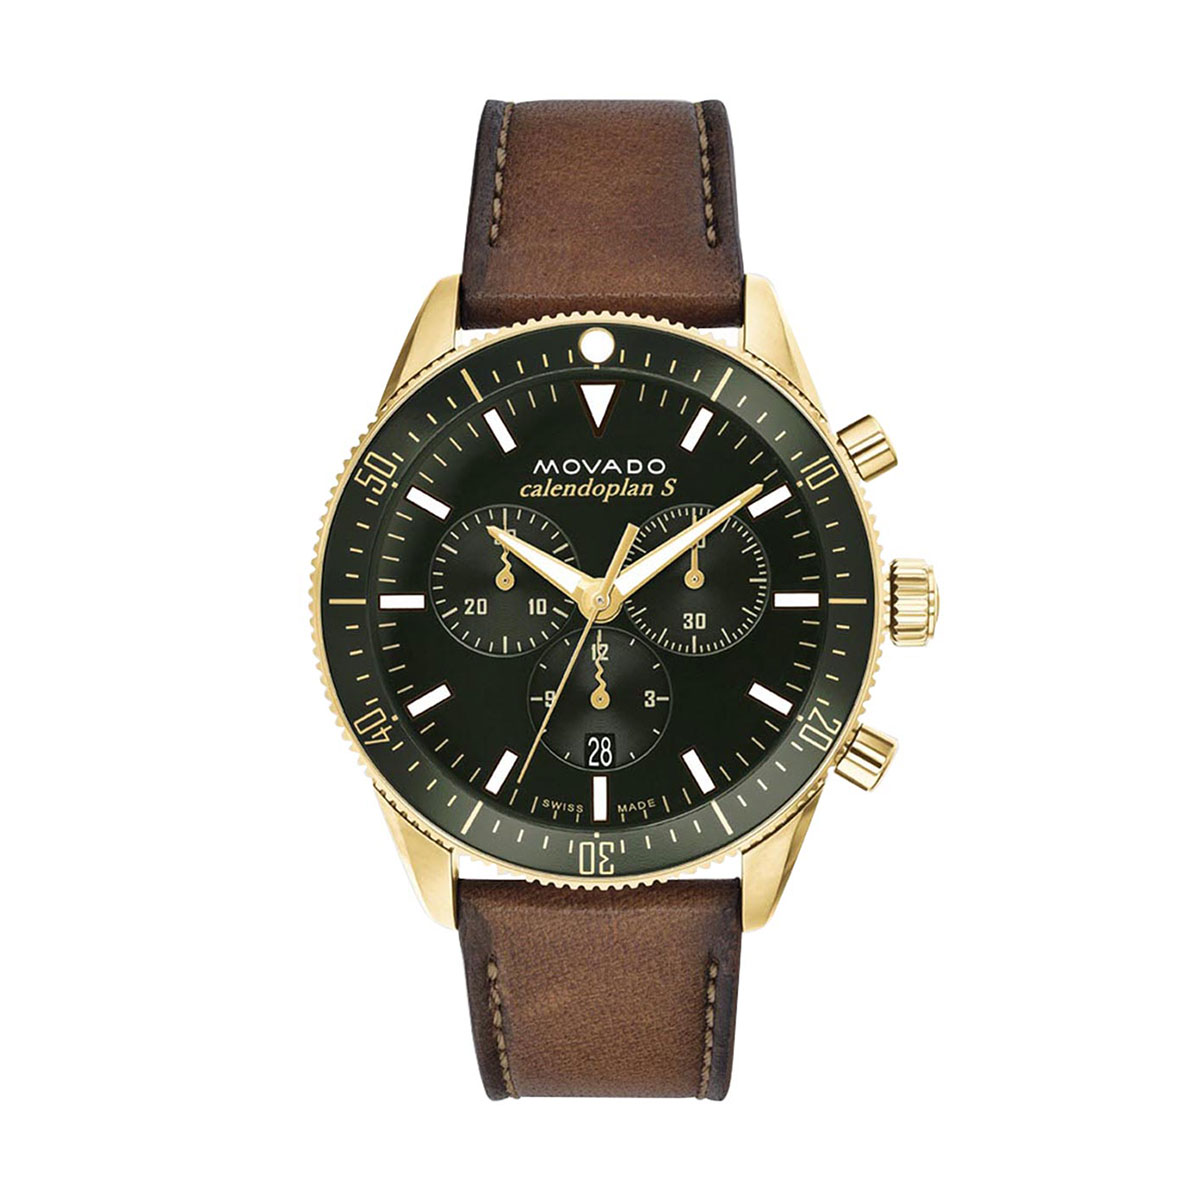 Movado Heritage Series 42mm Watch, Green Dial | 3650122 | Borsheims